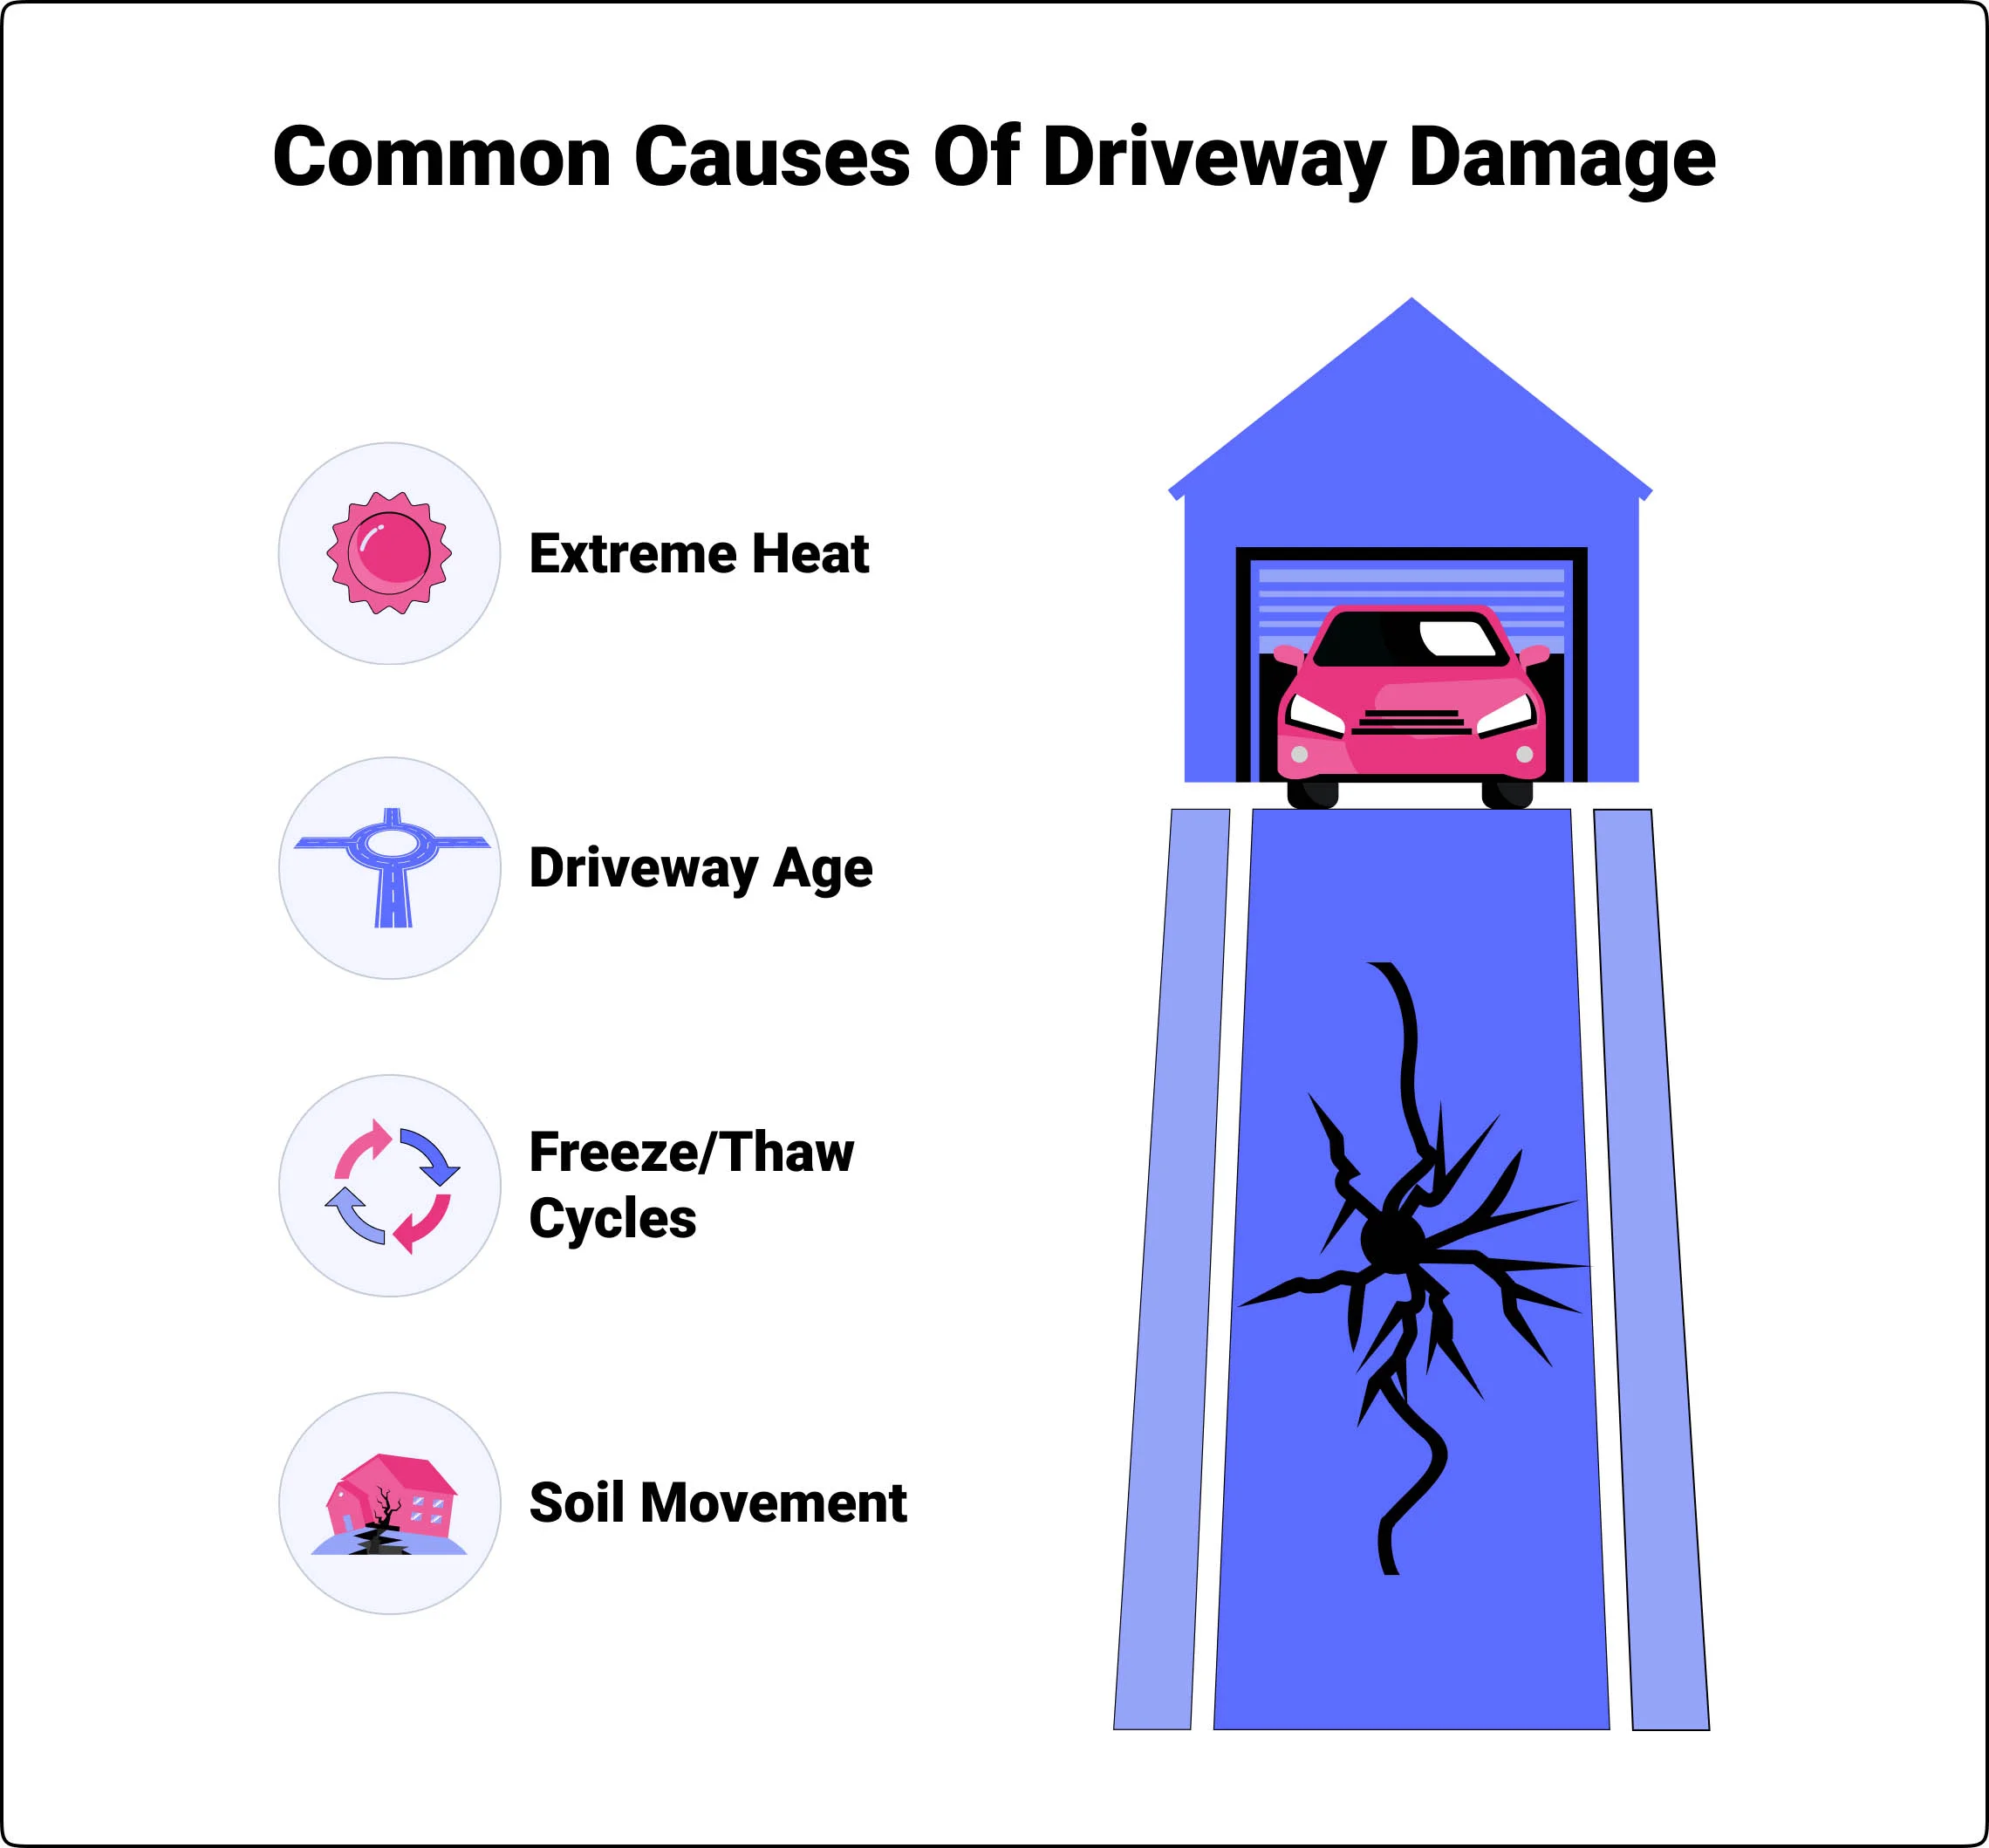 Common causes of driveway damage